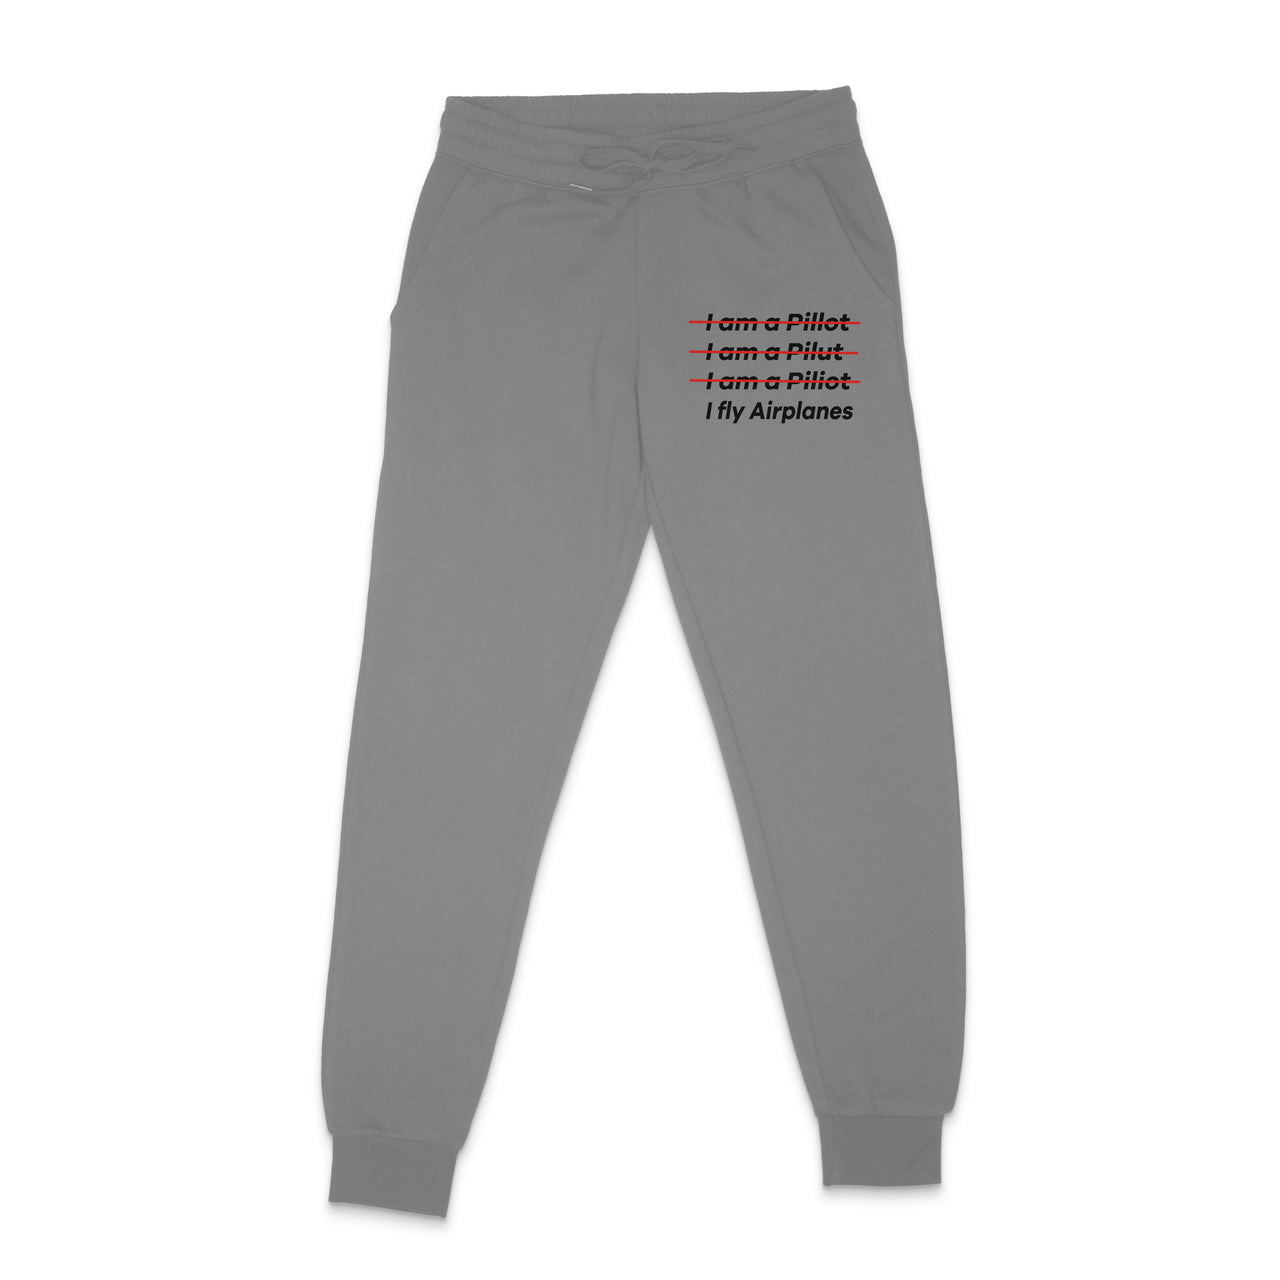 I Fly Airplanes Designed Sweatpants